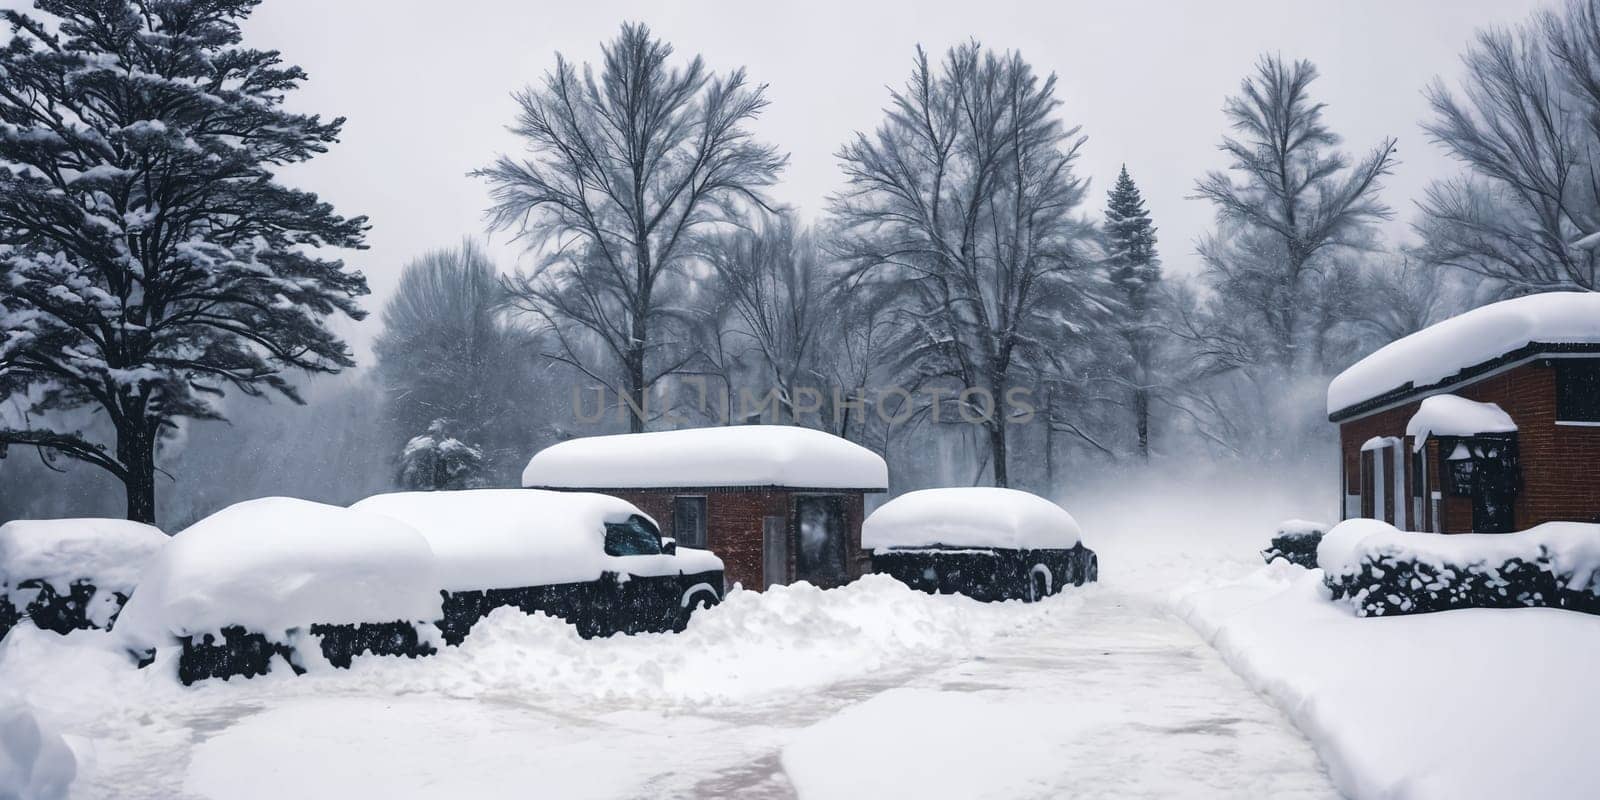 The impact of a severe blizzard with snowdrifts engulfing structures and roads by GoodOlga